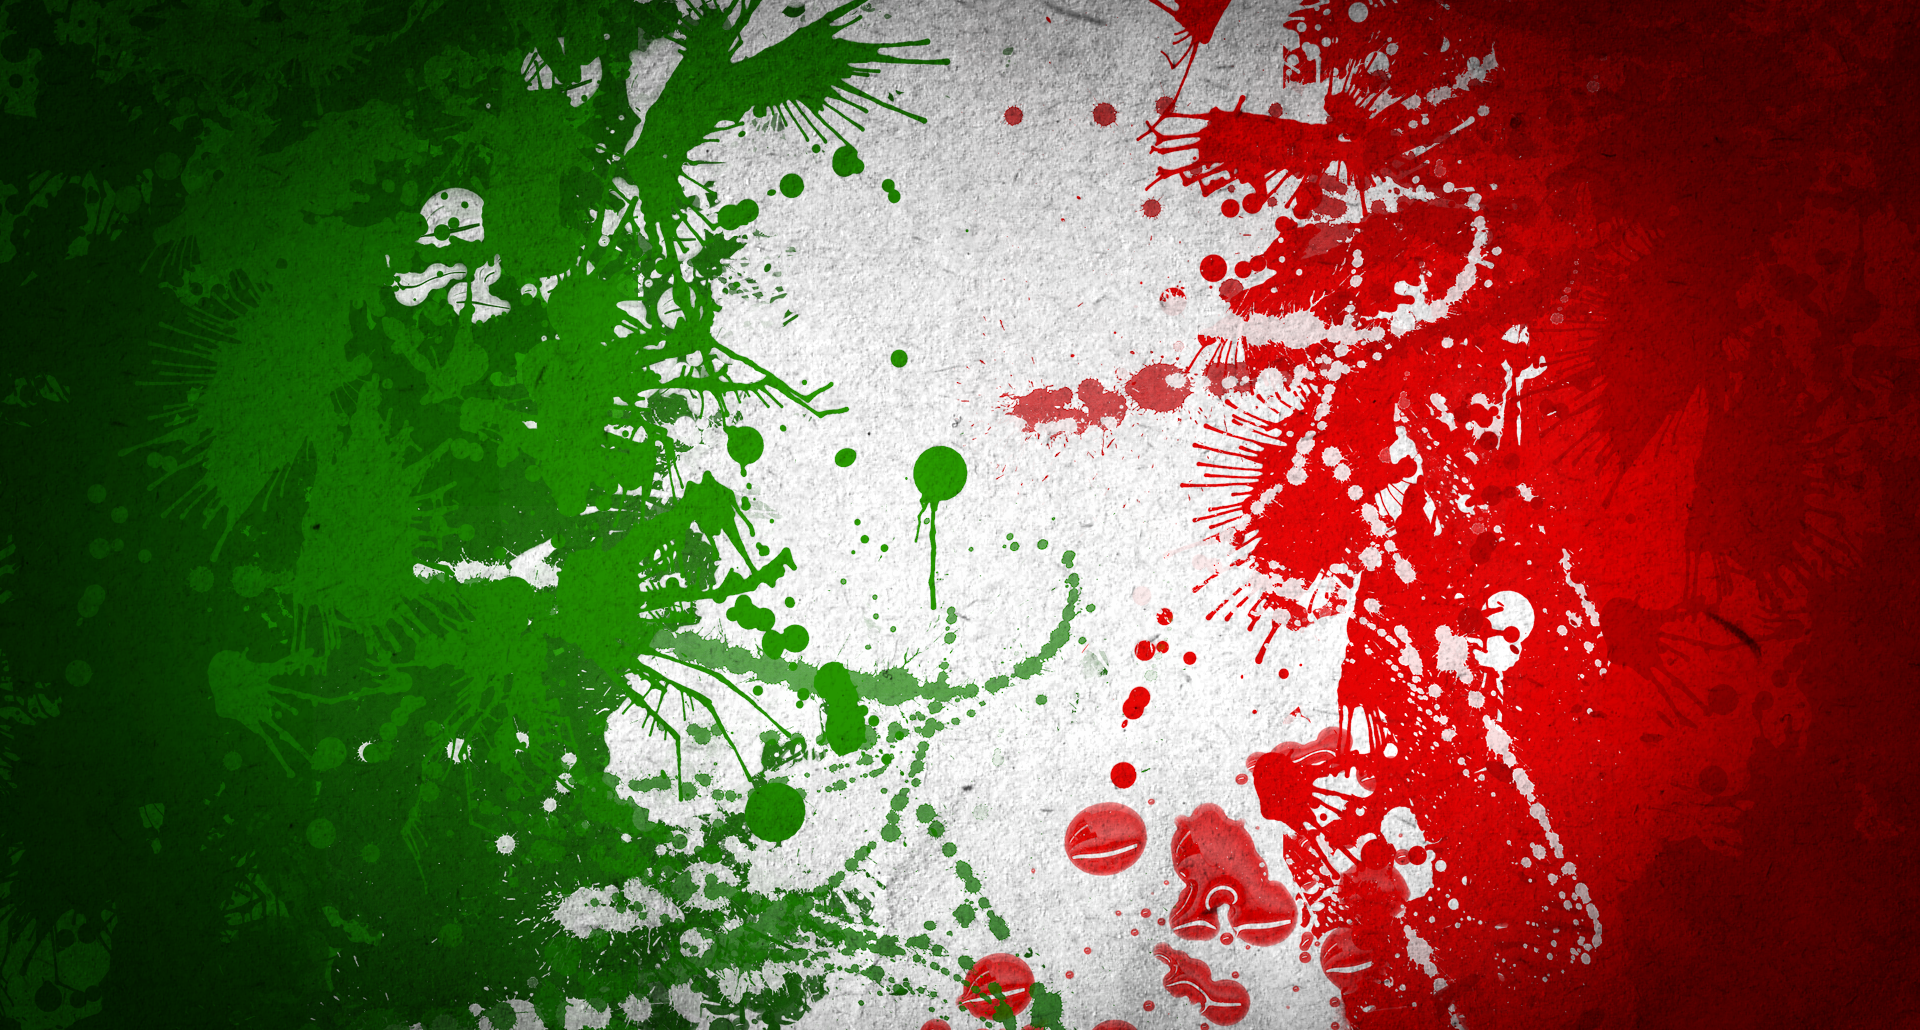 hd wallpapers incoming search terms mexican flag cool mexico flag Car